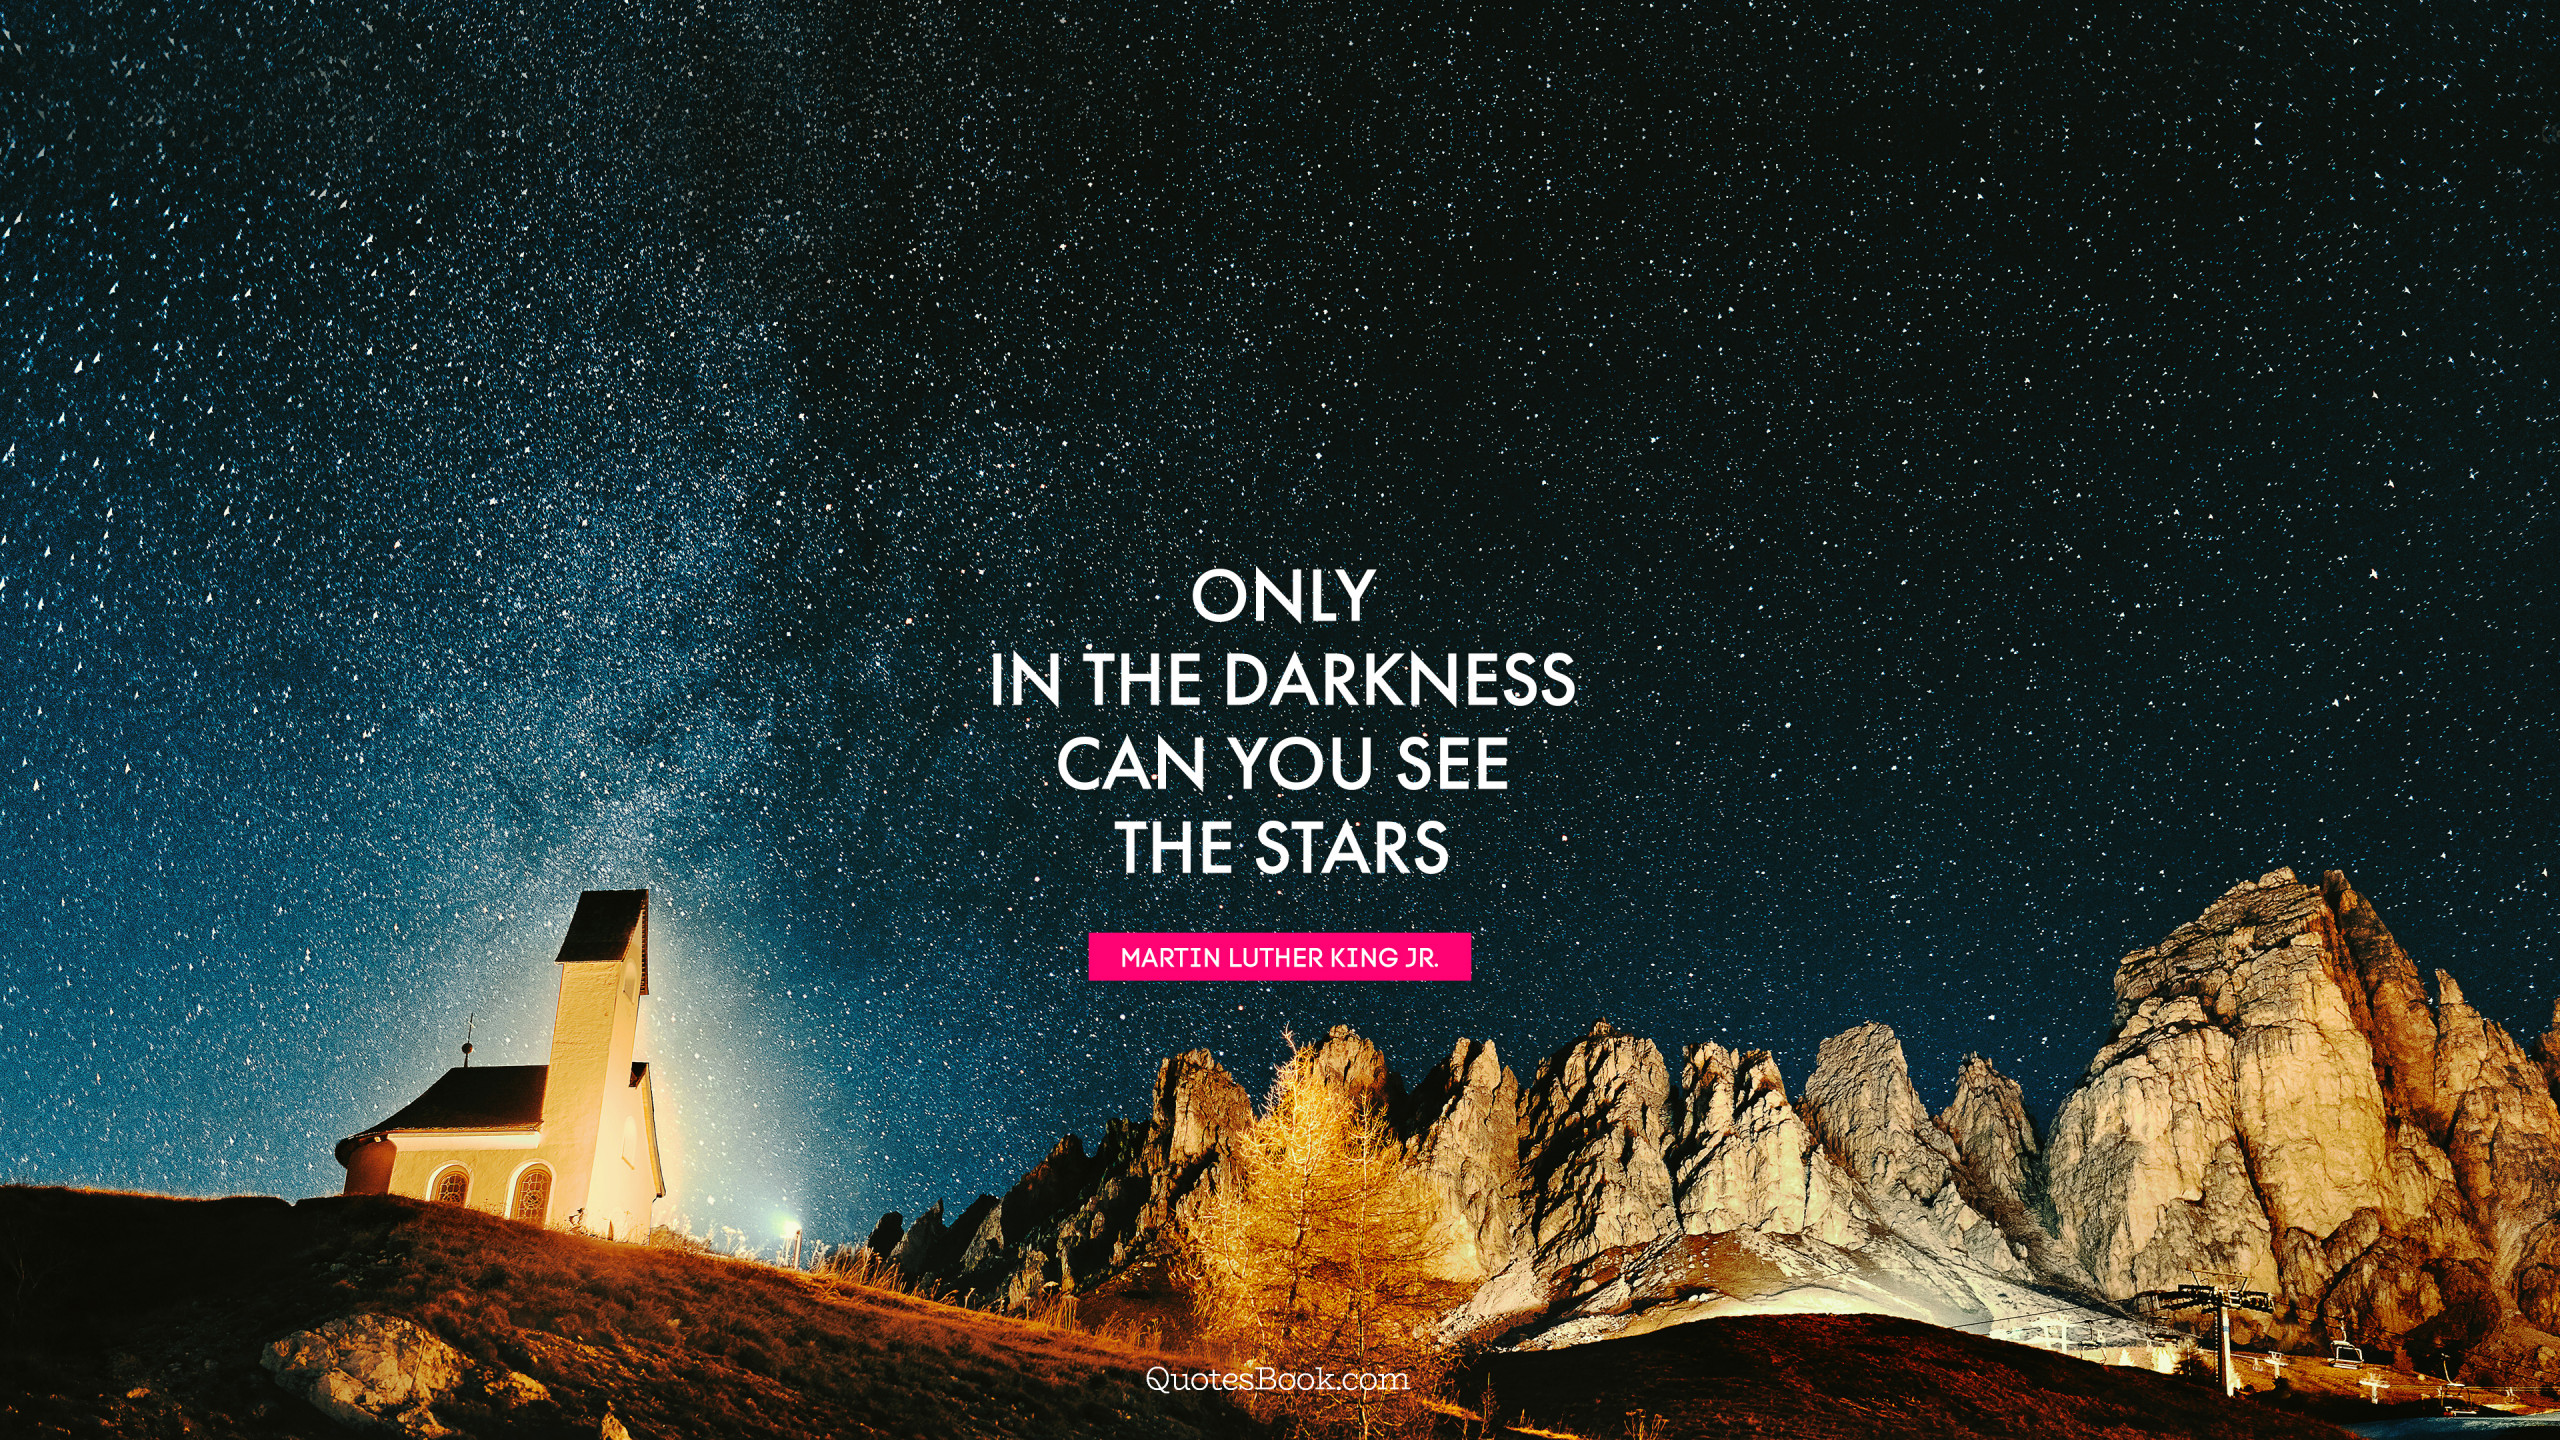 Only in the darkness can you see the stars. - Quote by Martin Luther